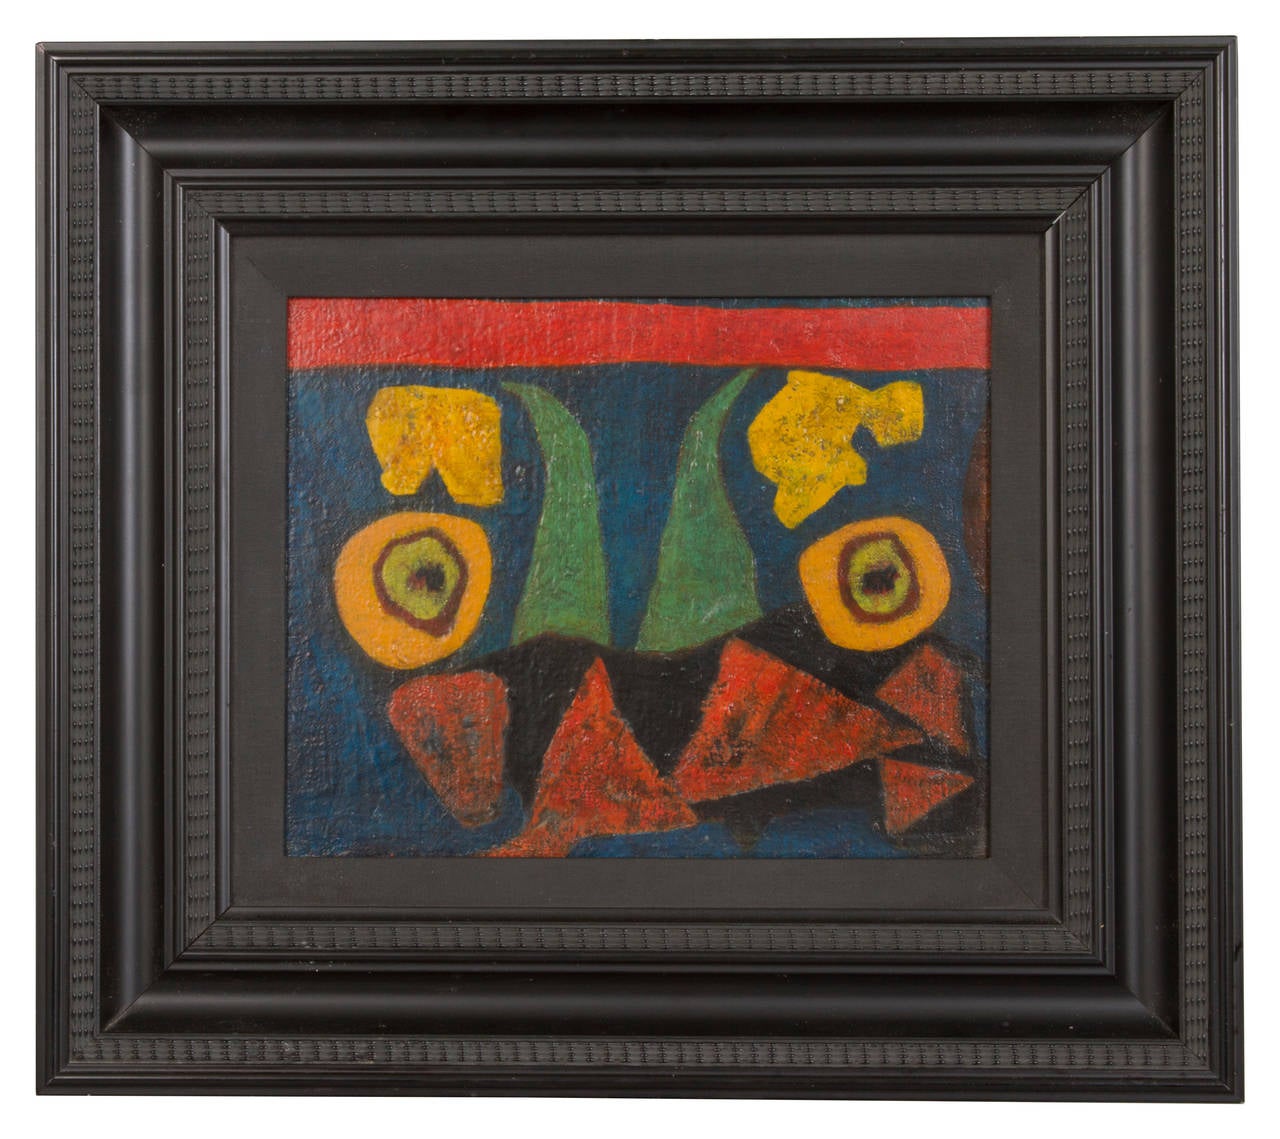 Painted in 1970 and signed Singer, this is a whimsical portrait of a face.